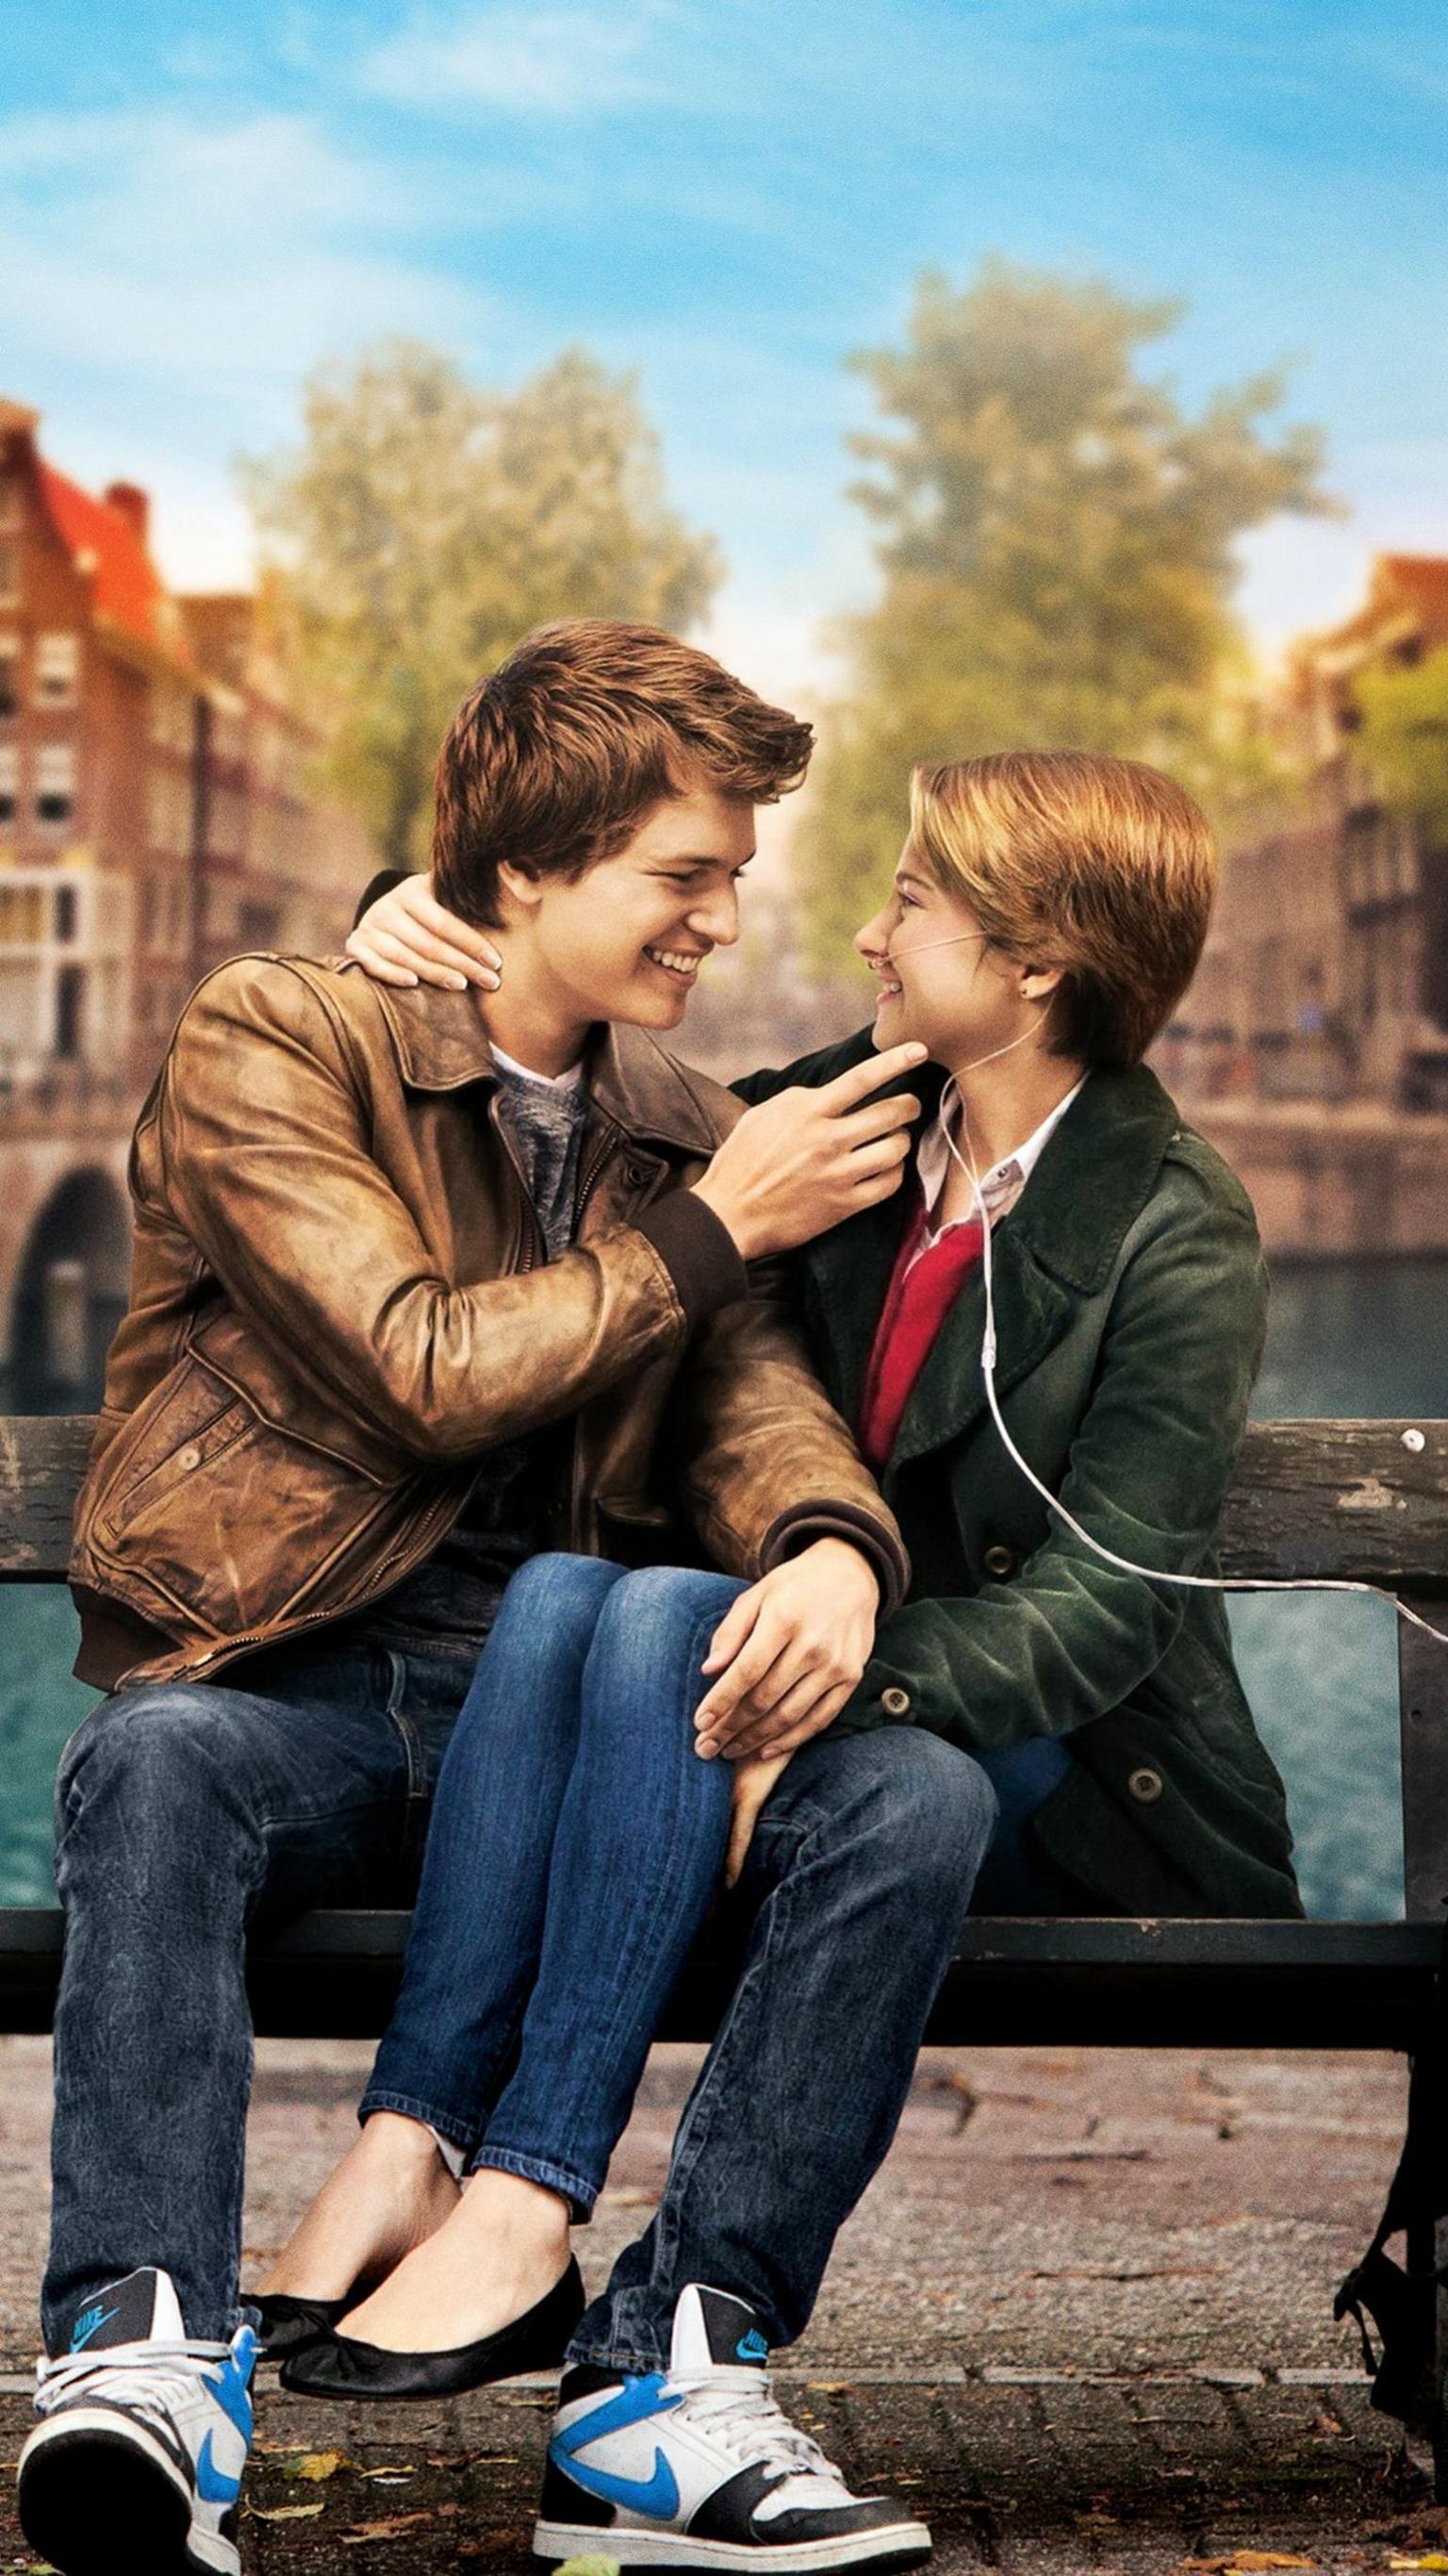 The Fault in Our Stars Wallpapers - Top ...